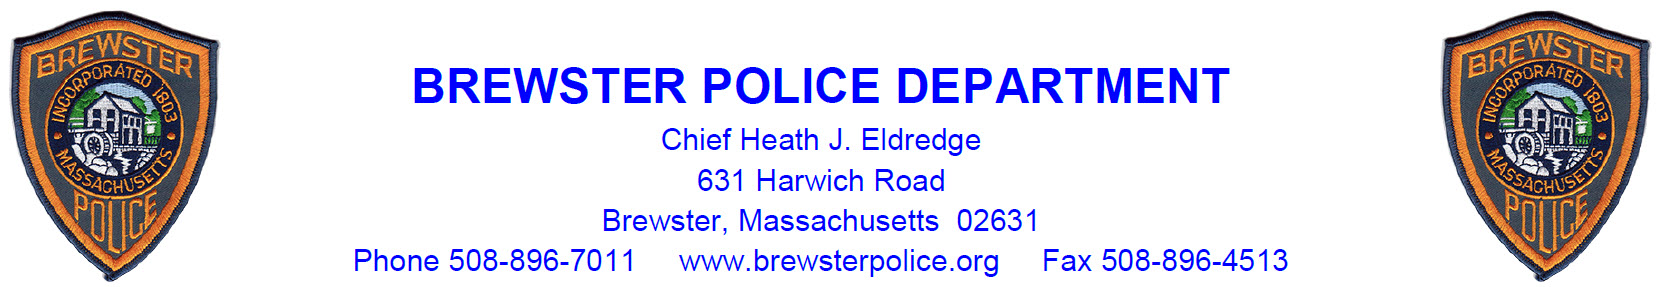 Brewster Police Department, MA Police Jobs